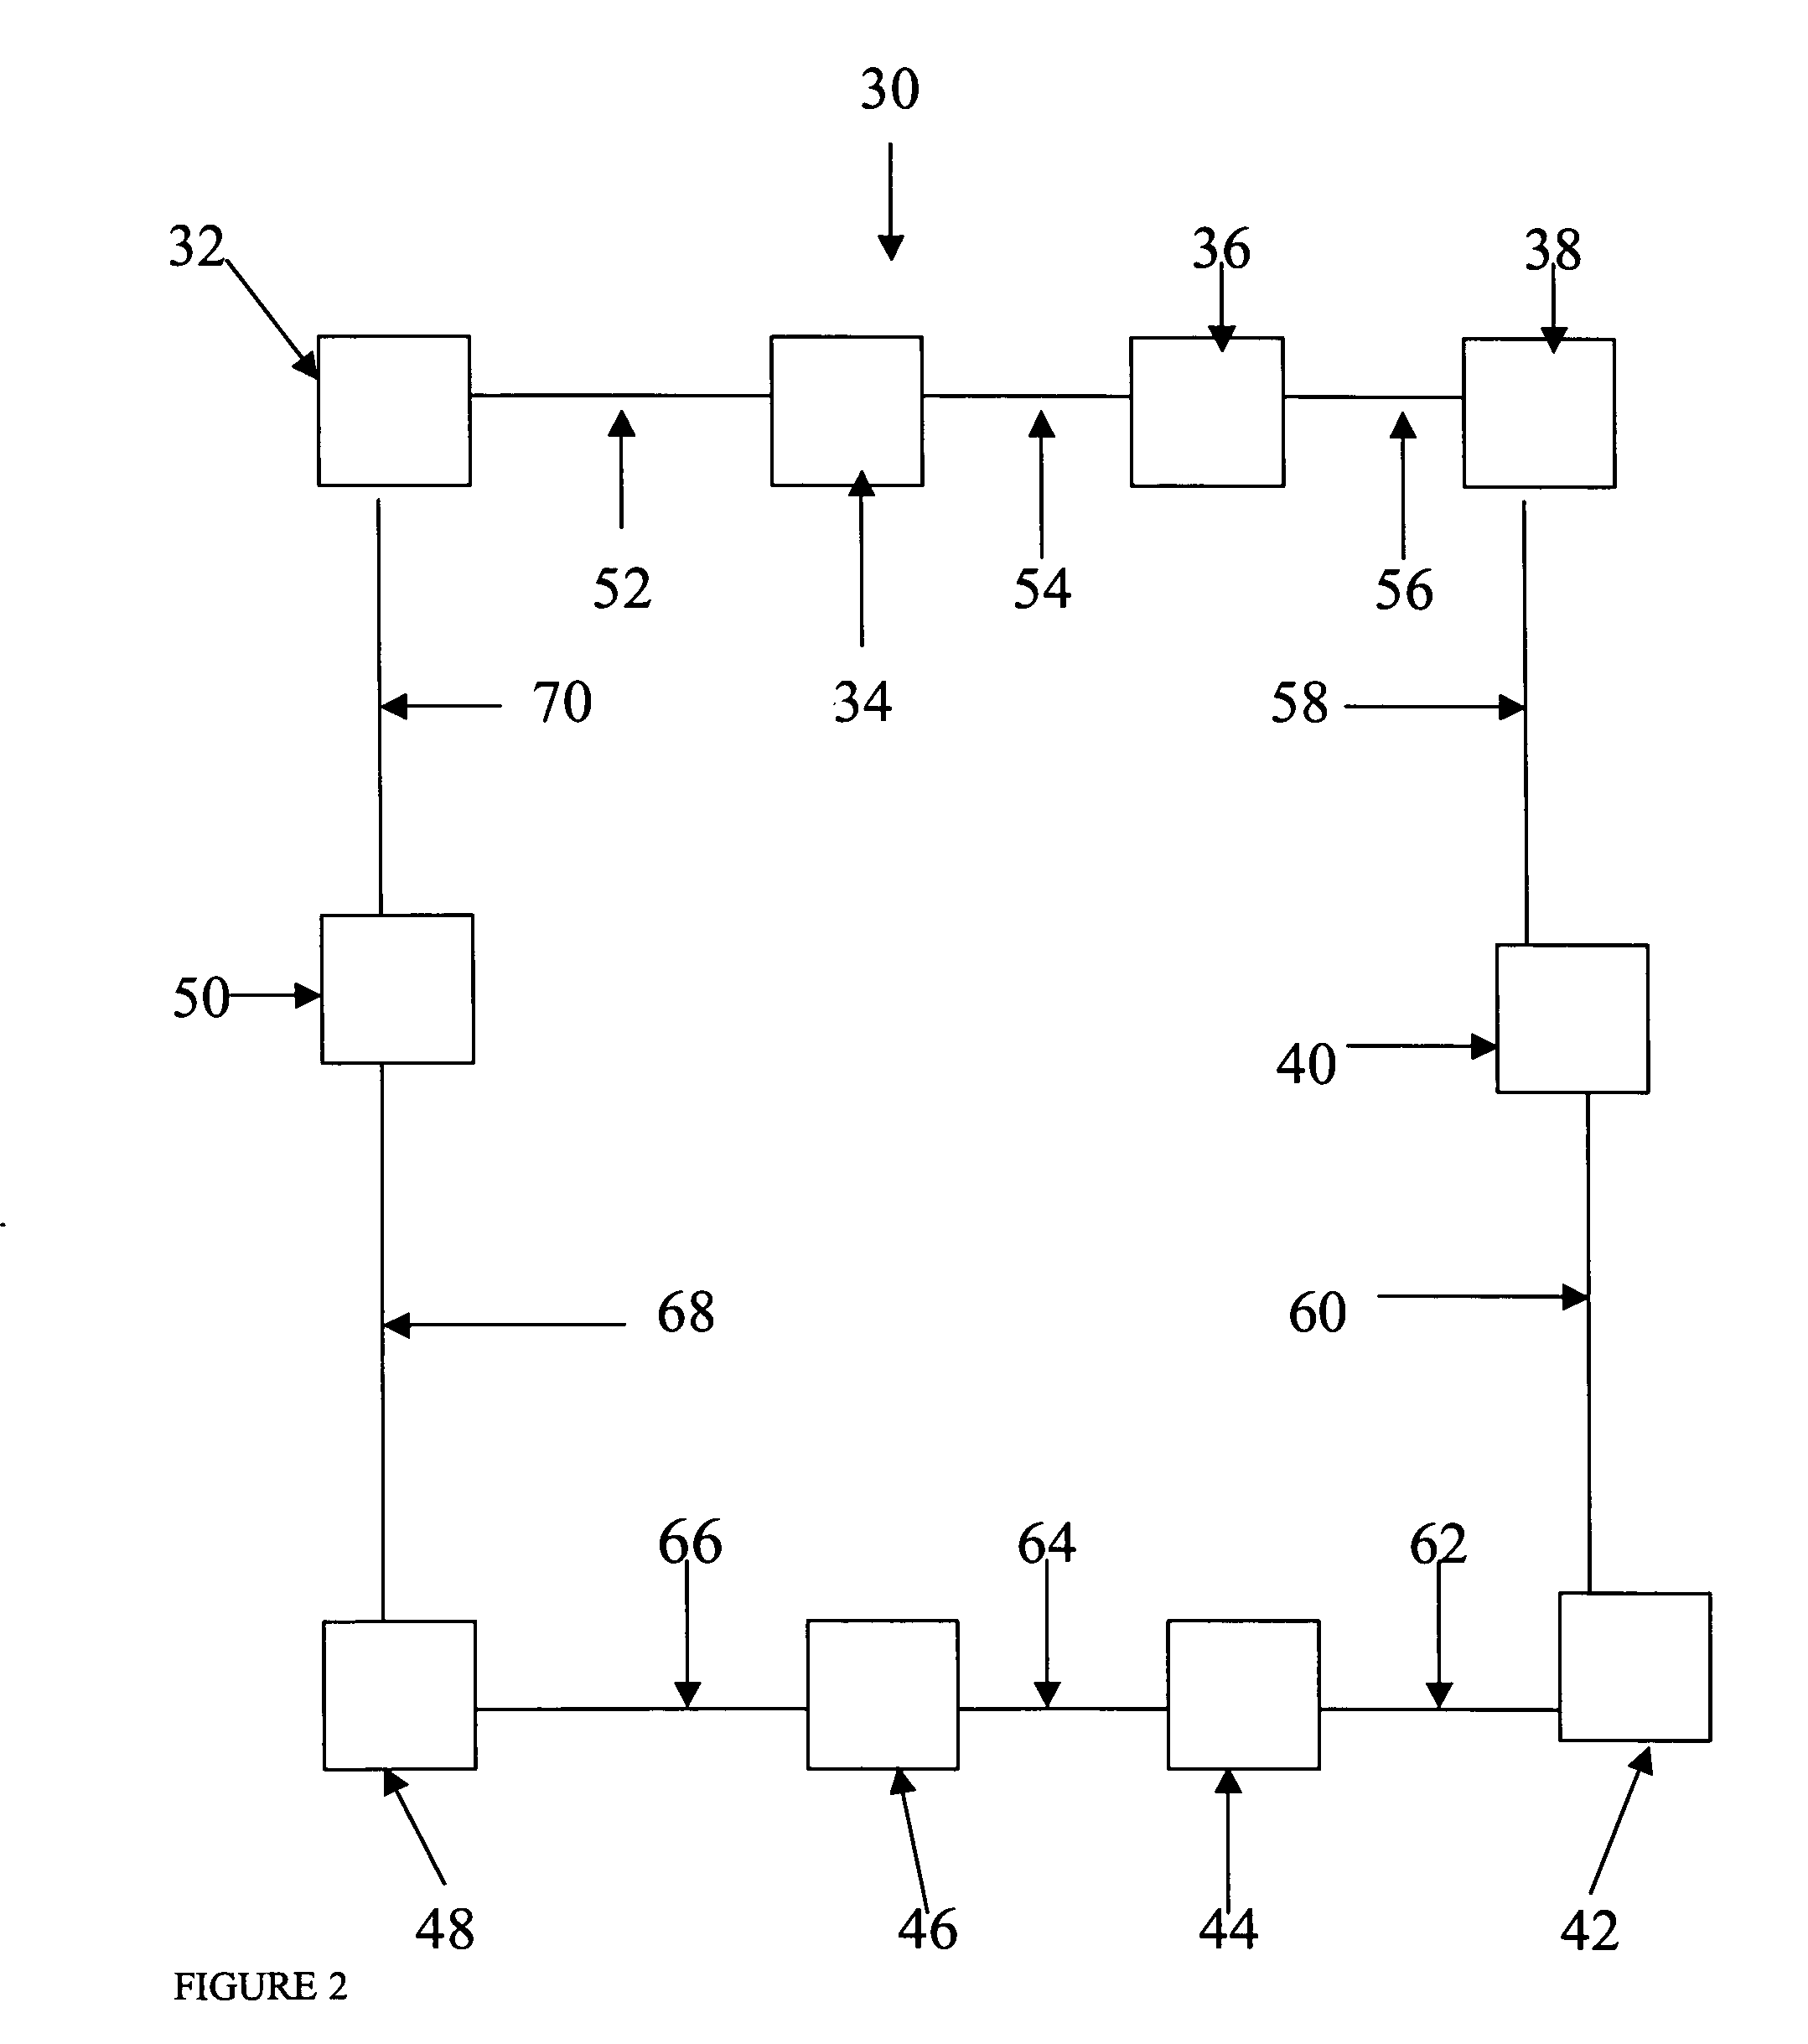 Method of determining at least one variable of a WDM optical network